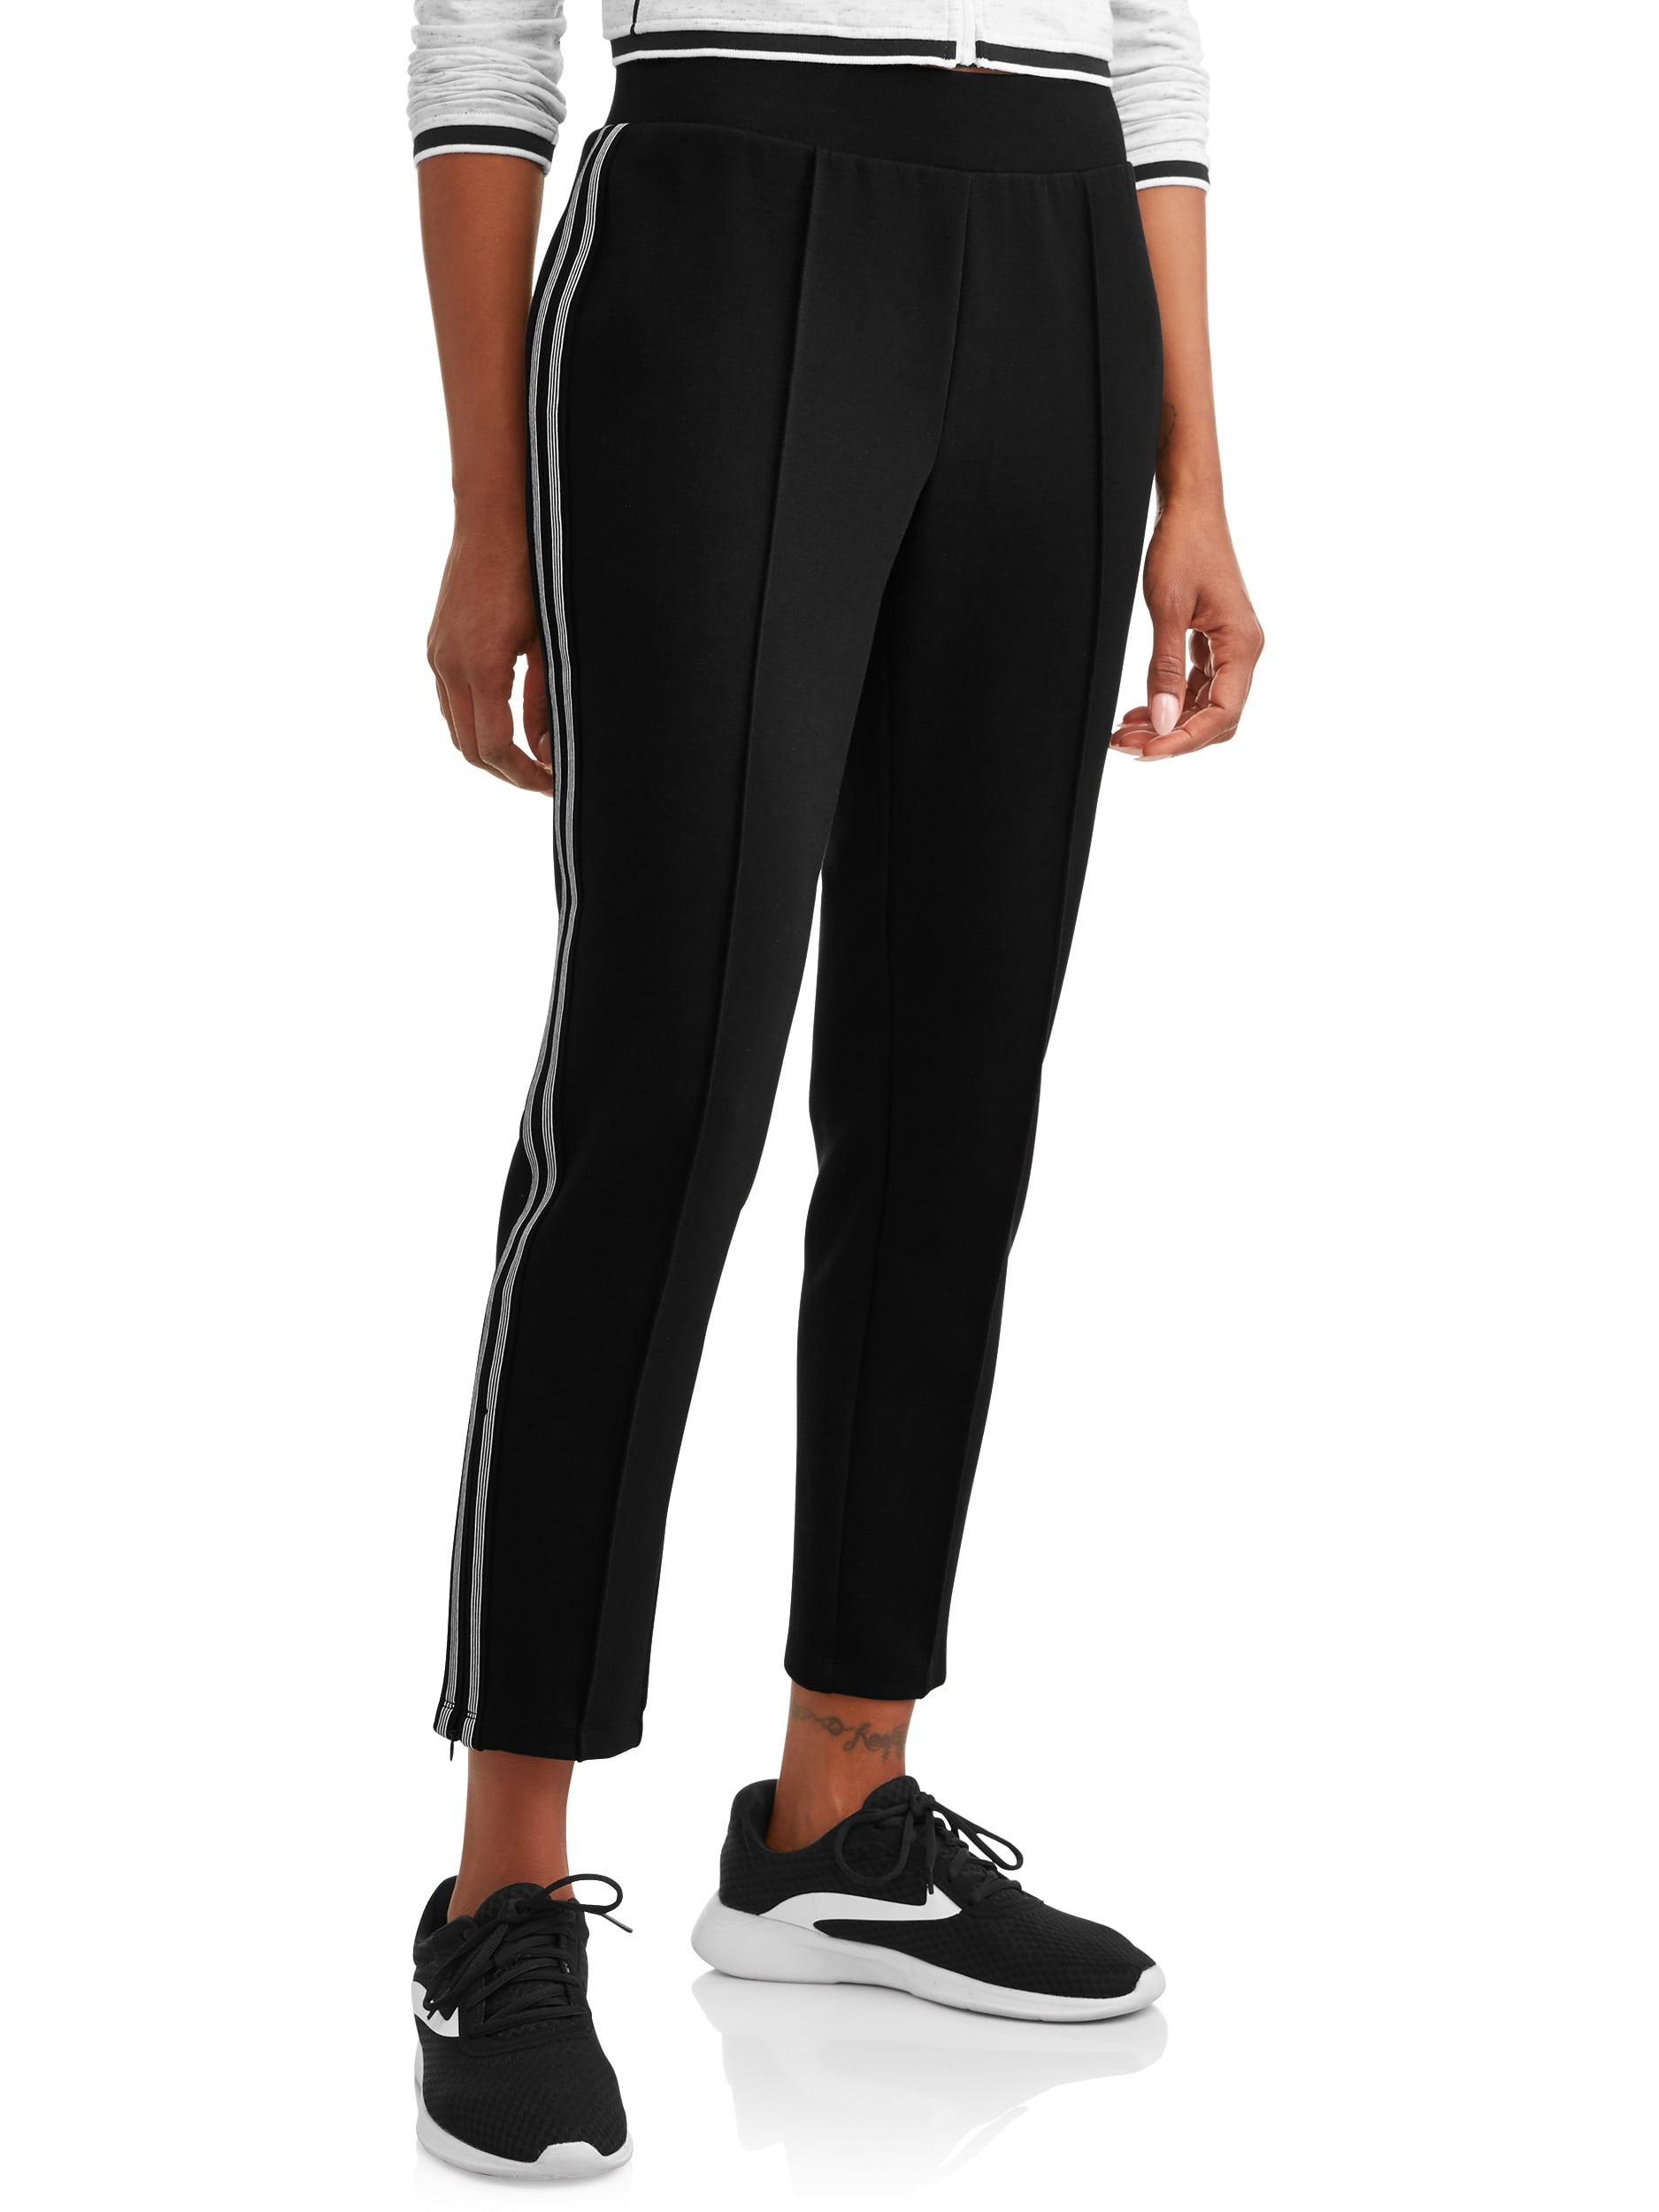 Avia Casual Athletic Pants for Women